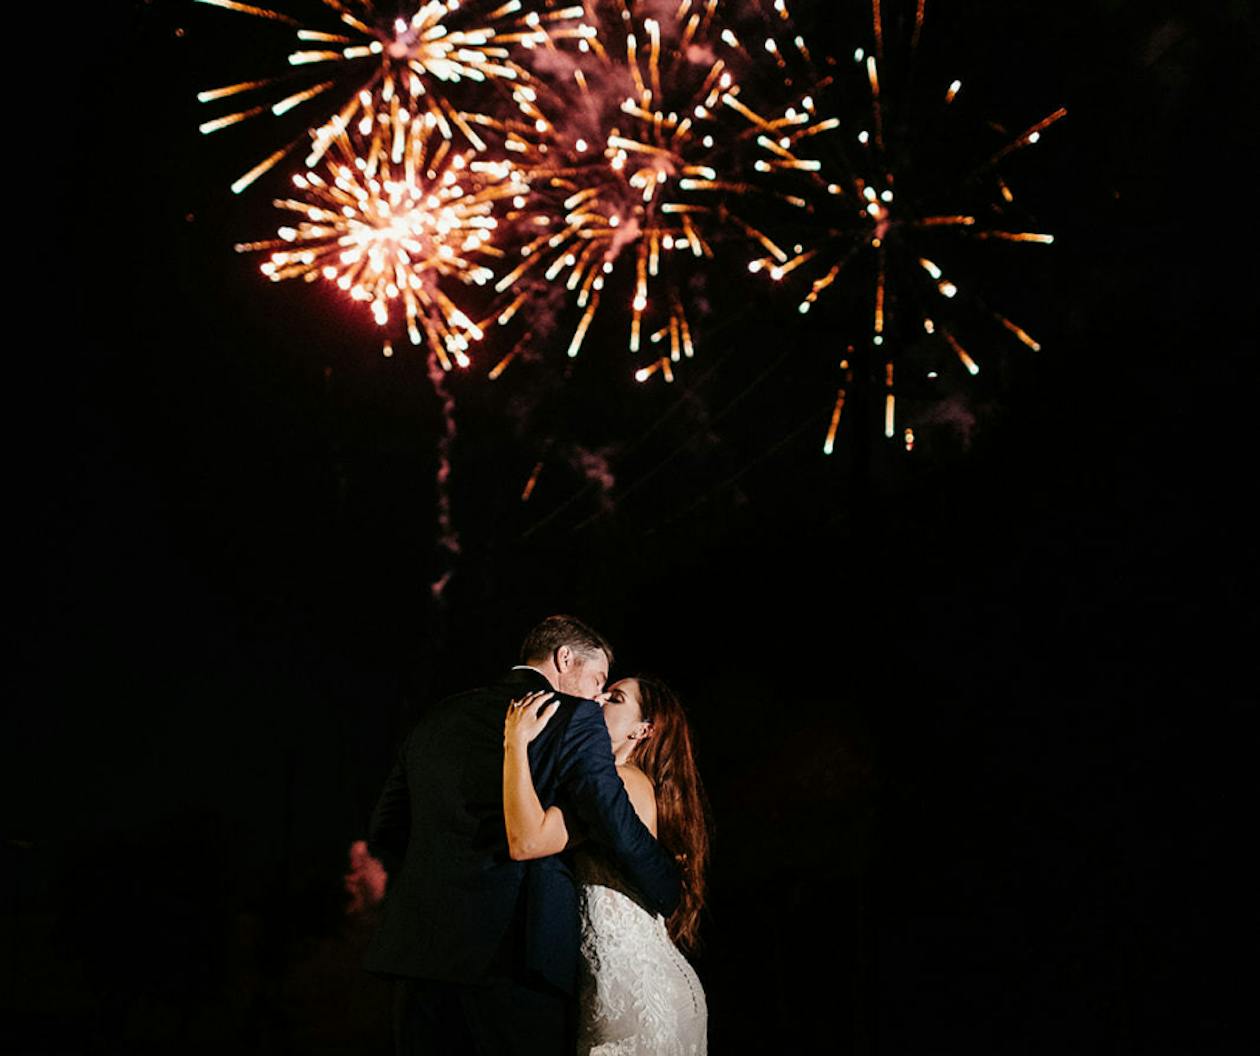 Couple Kissing Under Fireworks at Night Wedding Exit Ideas | PartySlate